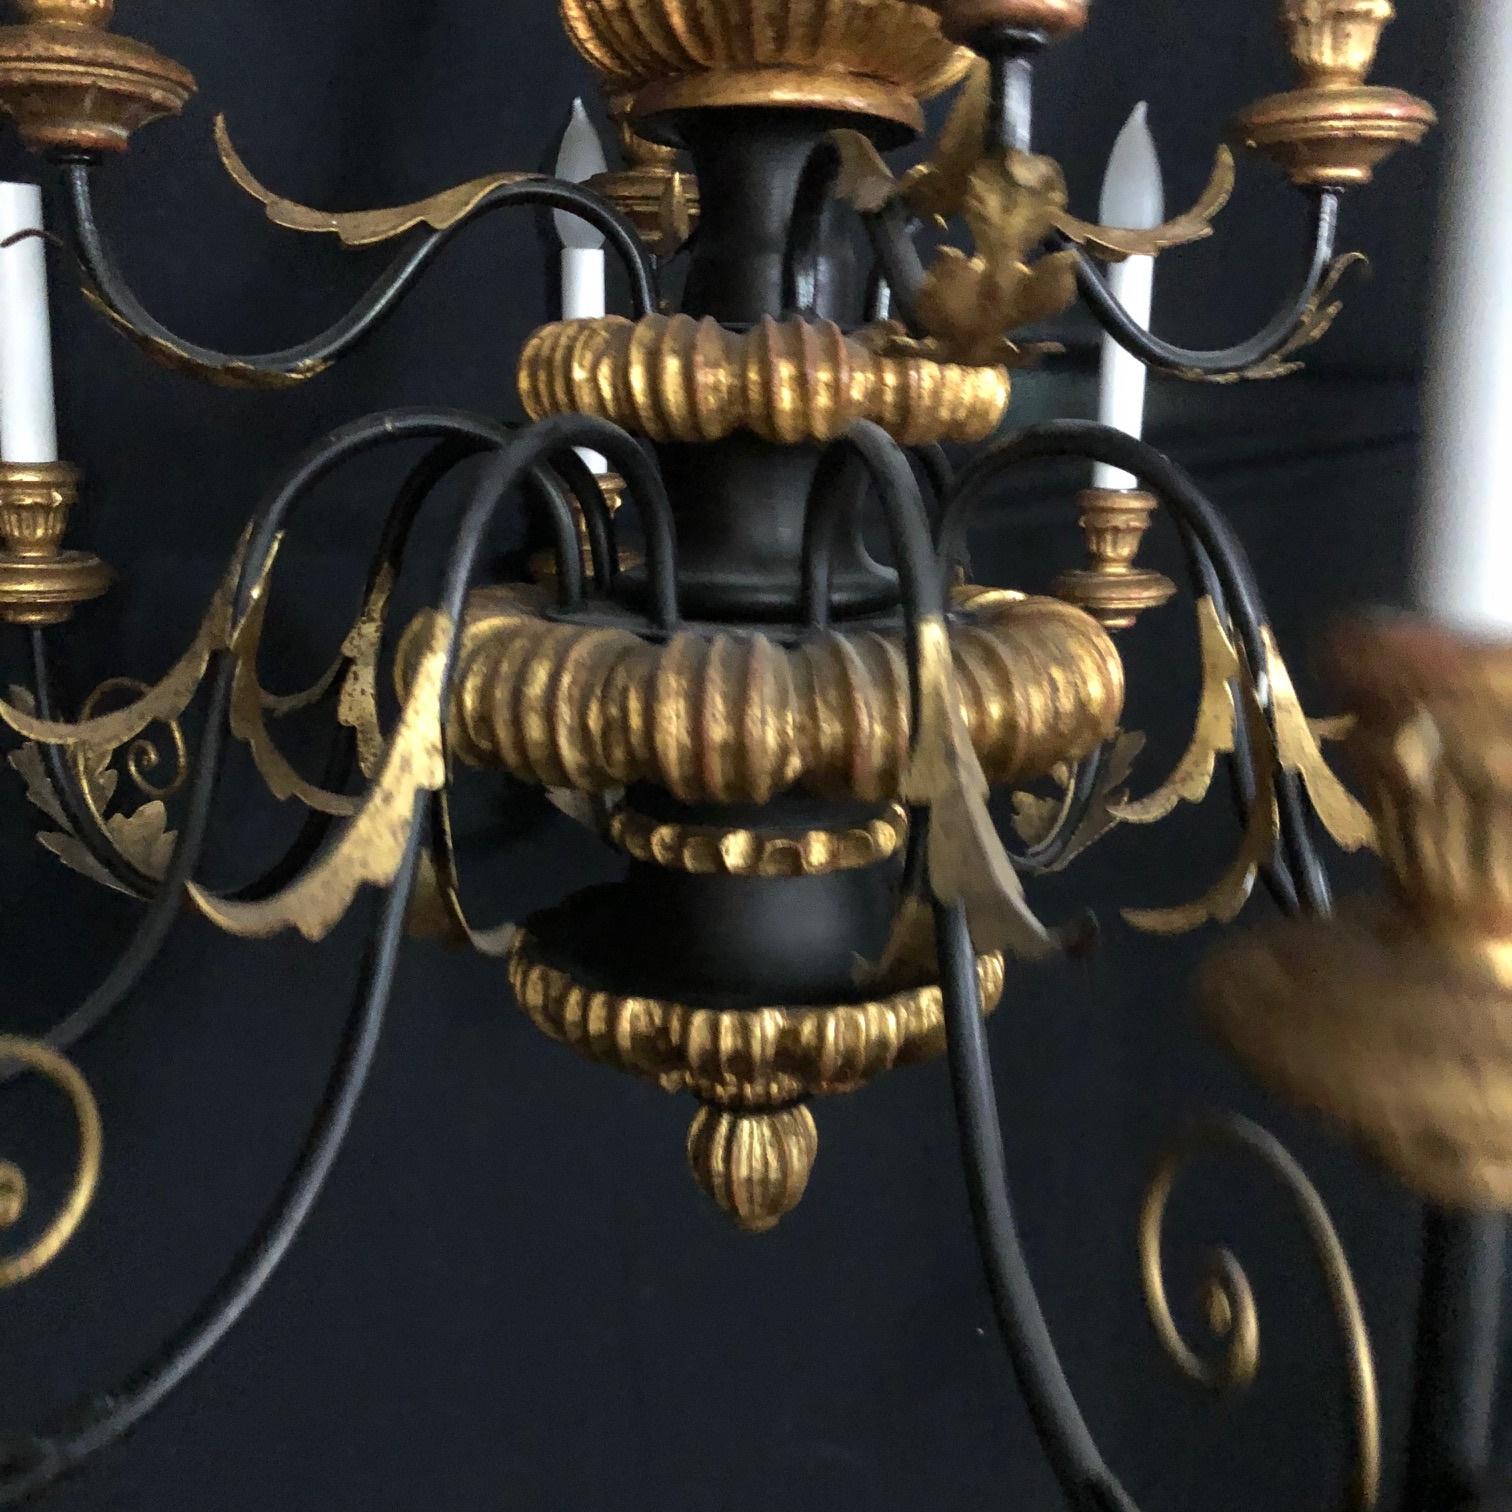 Large elaborate Rococo center shaft 12 arm Italian chandelier with two tiers: Lower tier has eight arms and upper tier has four arms. Garlands of golden acanthus leaves adorn the arms. The chandelier has a wonderful Regency style gold and black